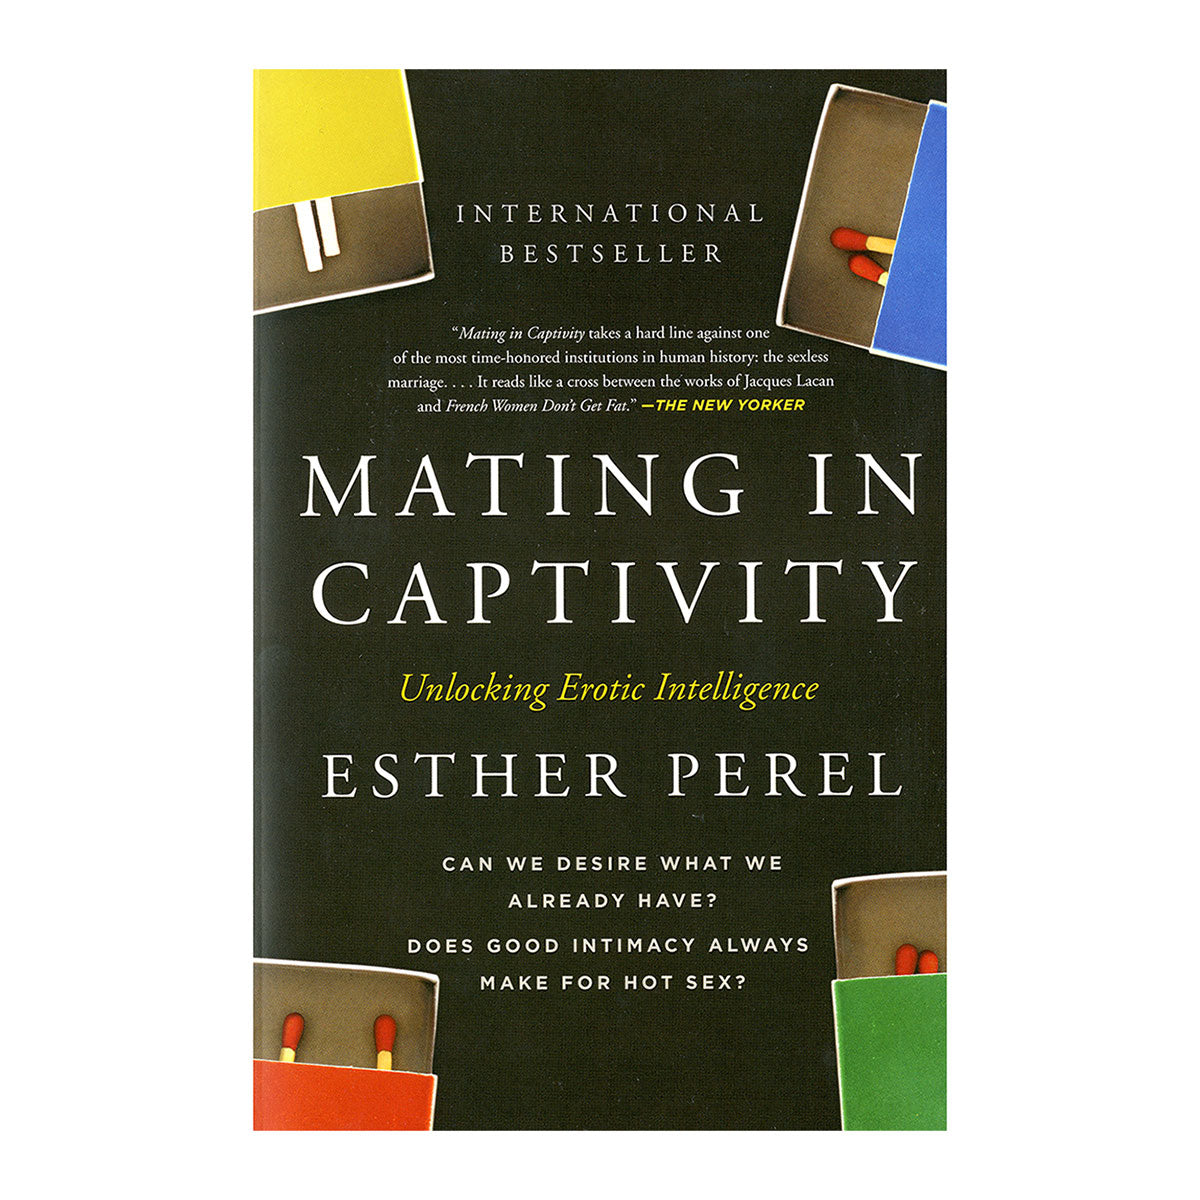 Mating in Captivity by Esther Perel paperback